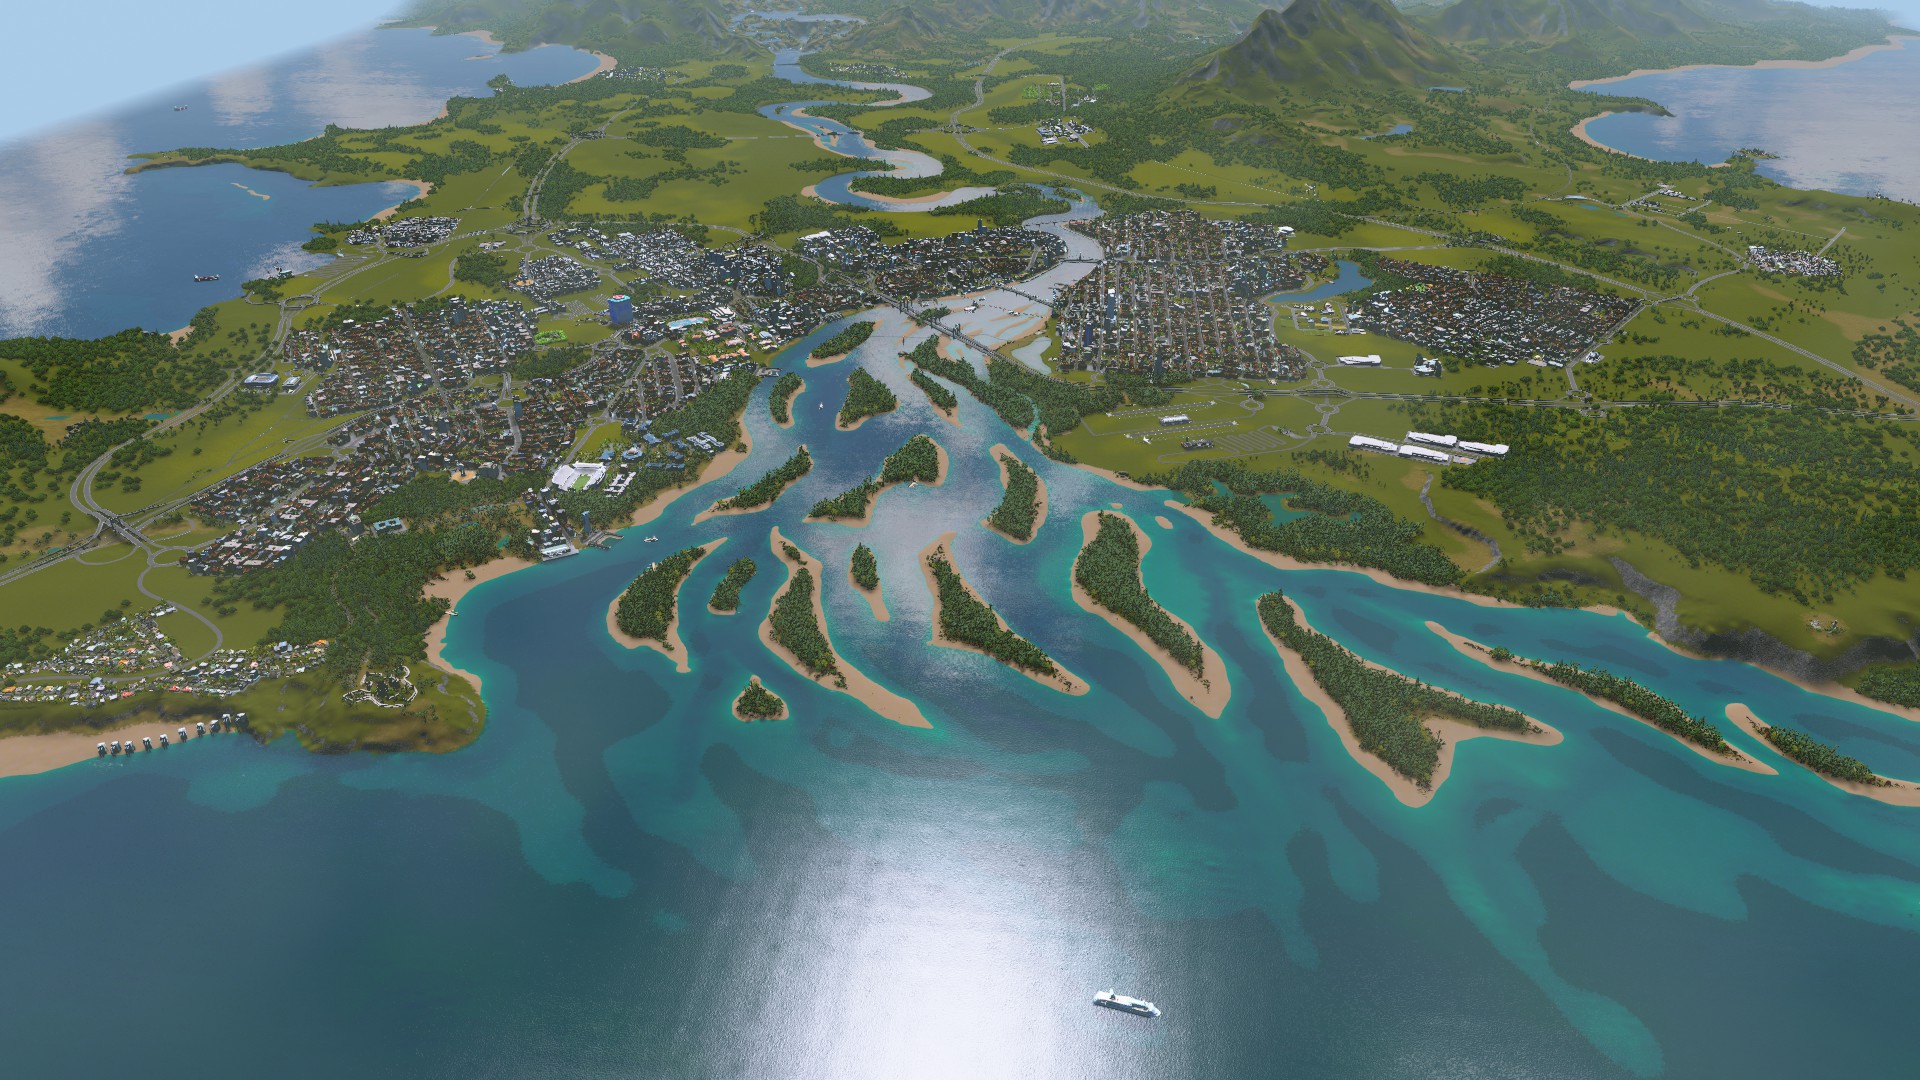 Afvist Balehval zoom Cities: Skylines on Twitter: "Don't you just love seeing a map fill in with  city sprawl? 😍 Picture by {R}theCroc https://t.co/oTplThDs5J" / Twitter